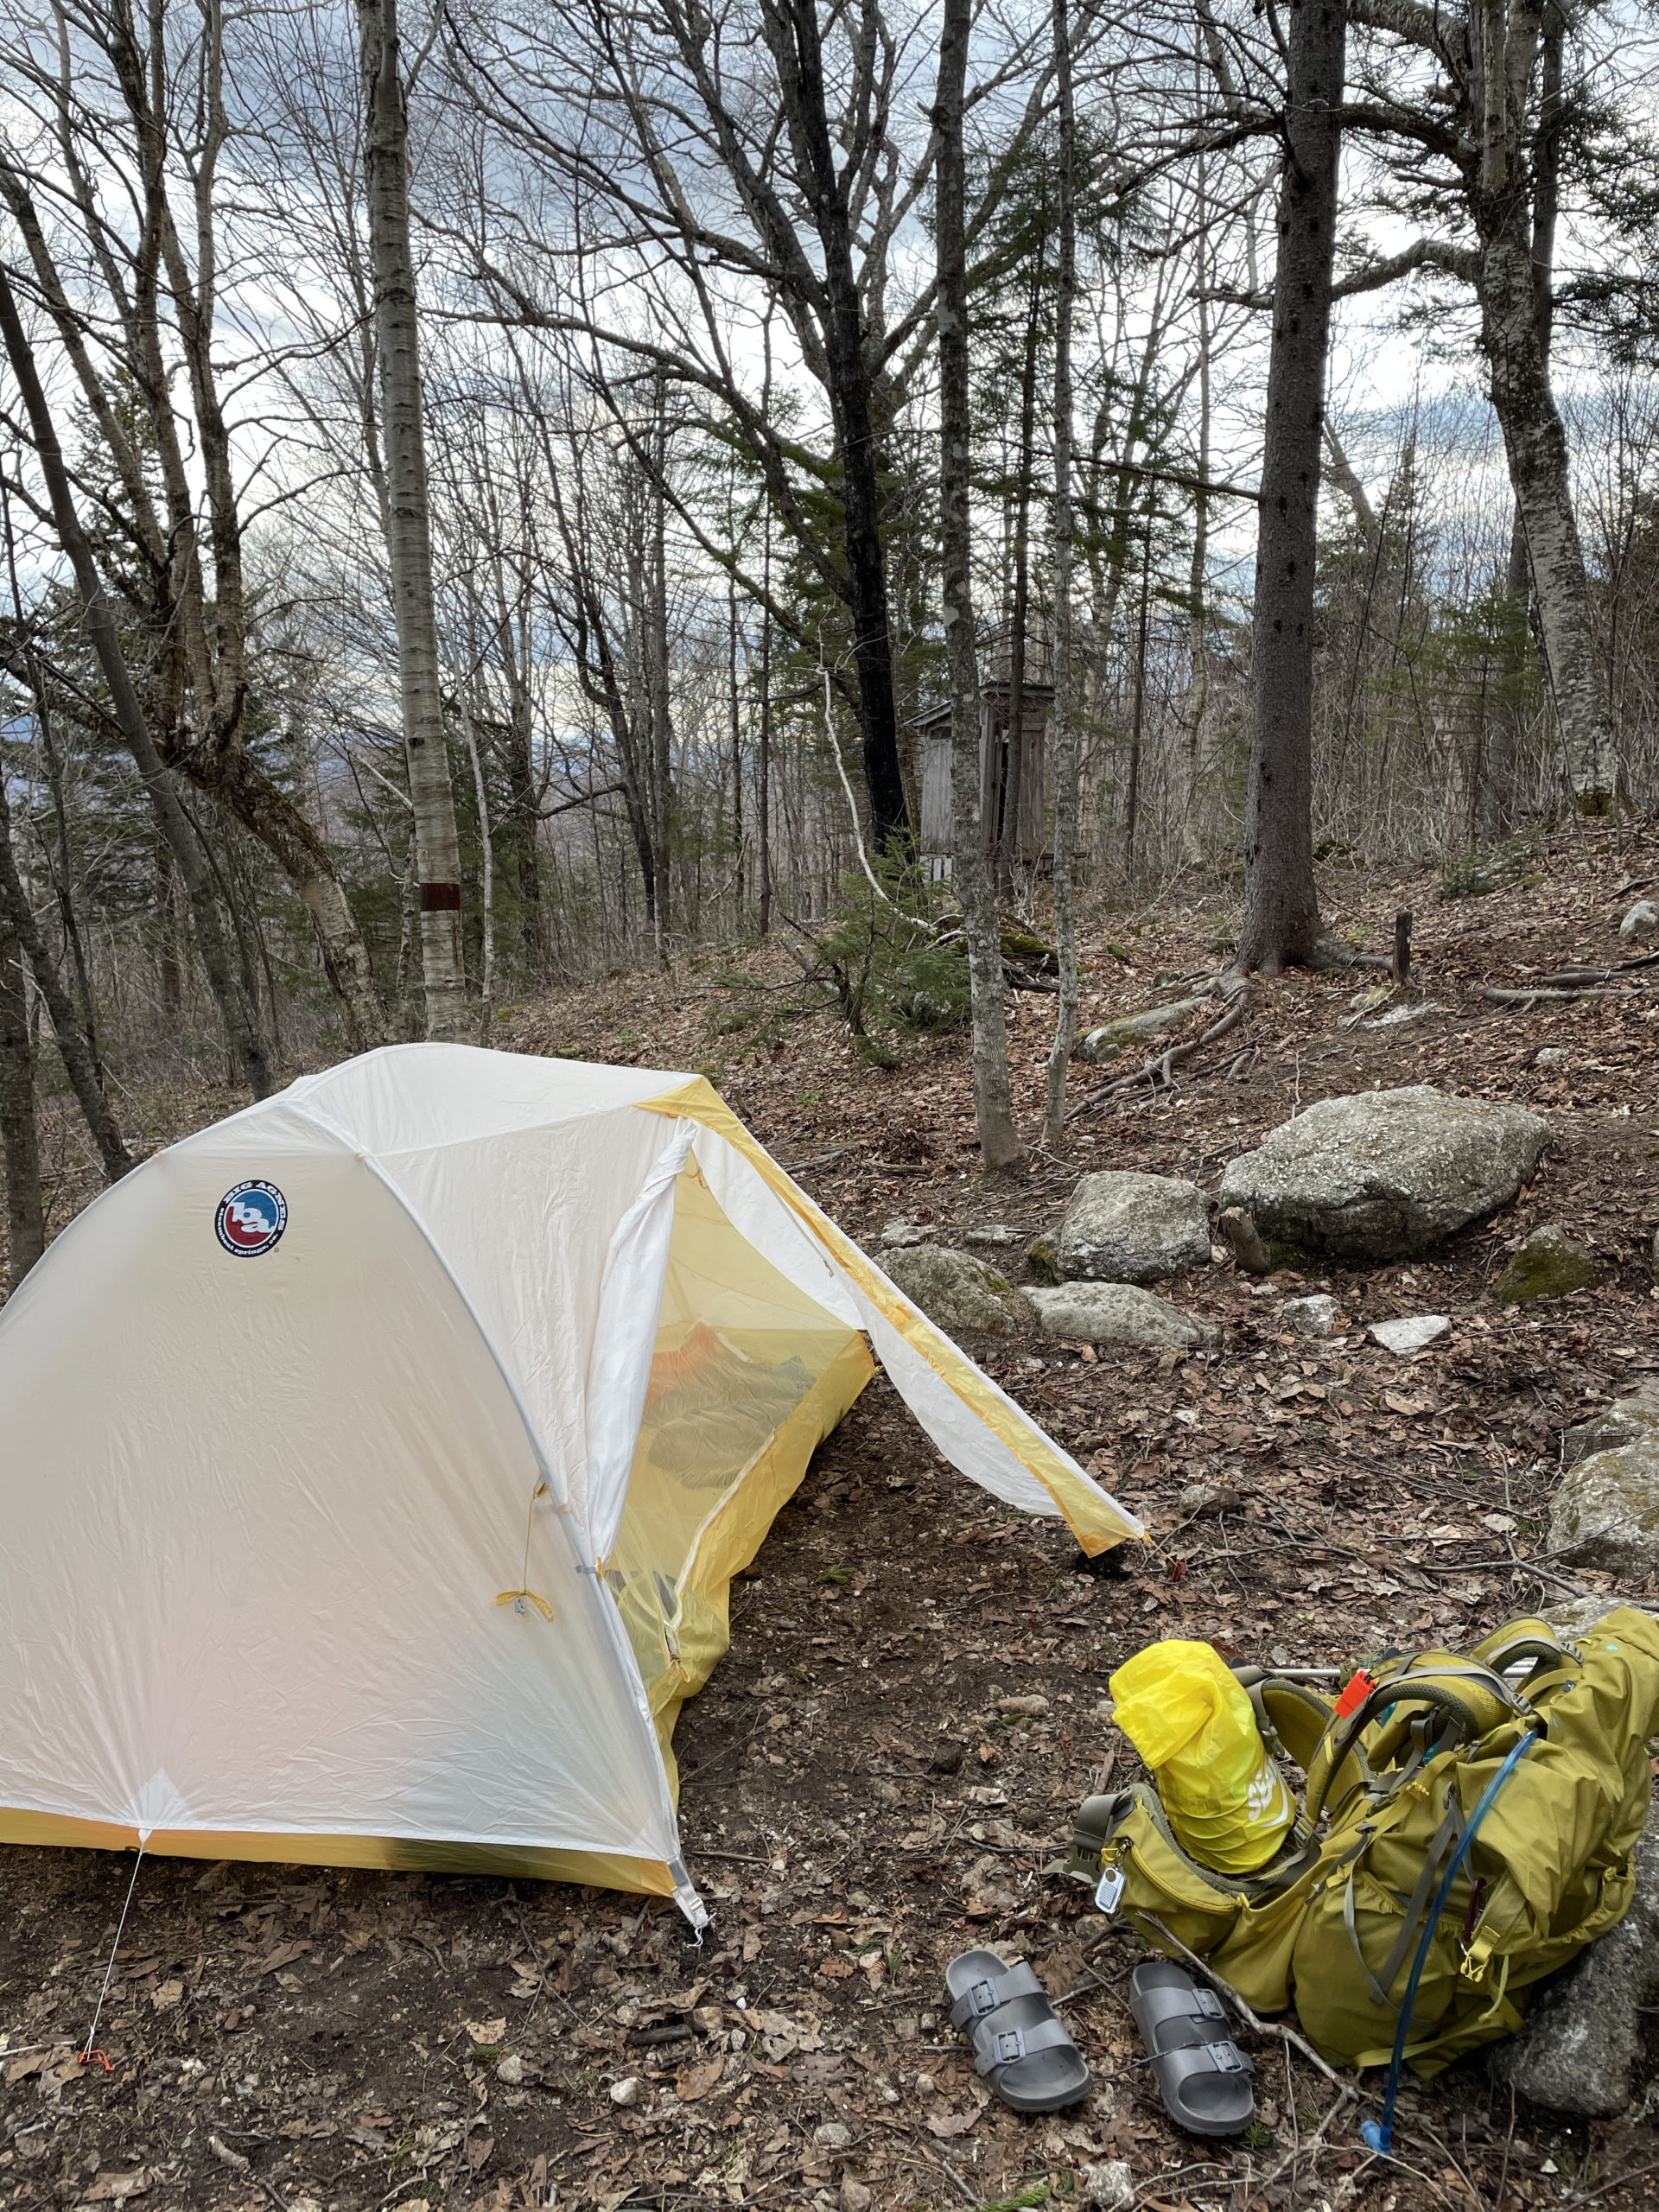 Sargent Brook tent site while hiking and backpacking the Grafton Notch Loop Trail in the White Mountains, Maine